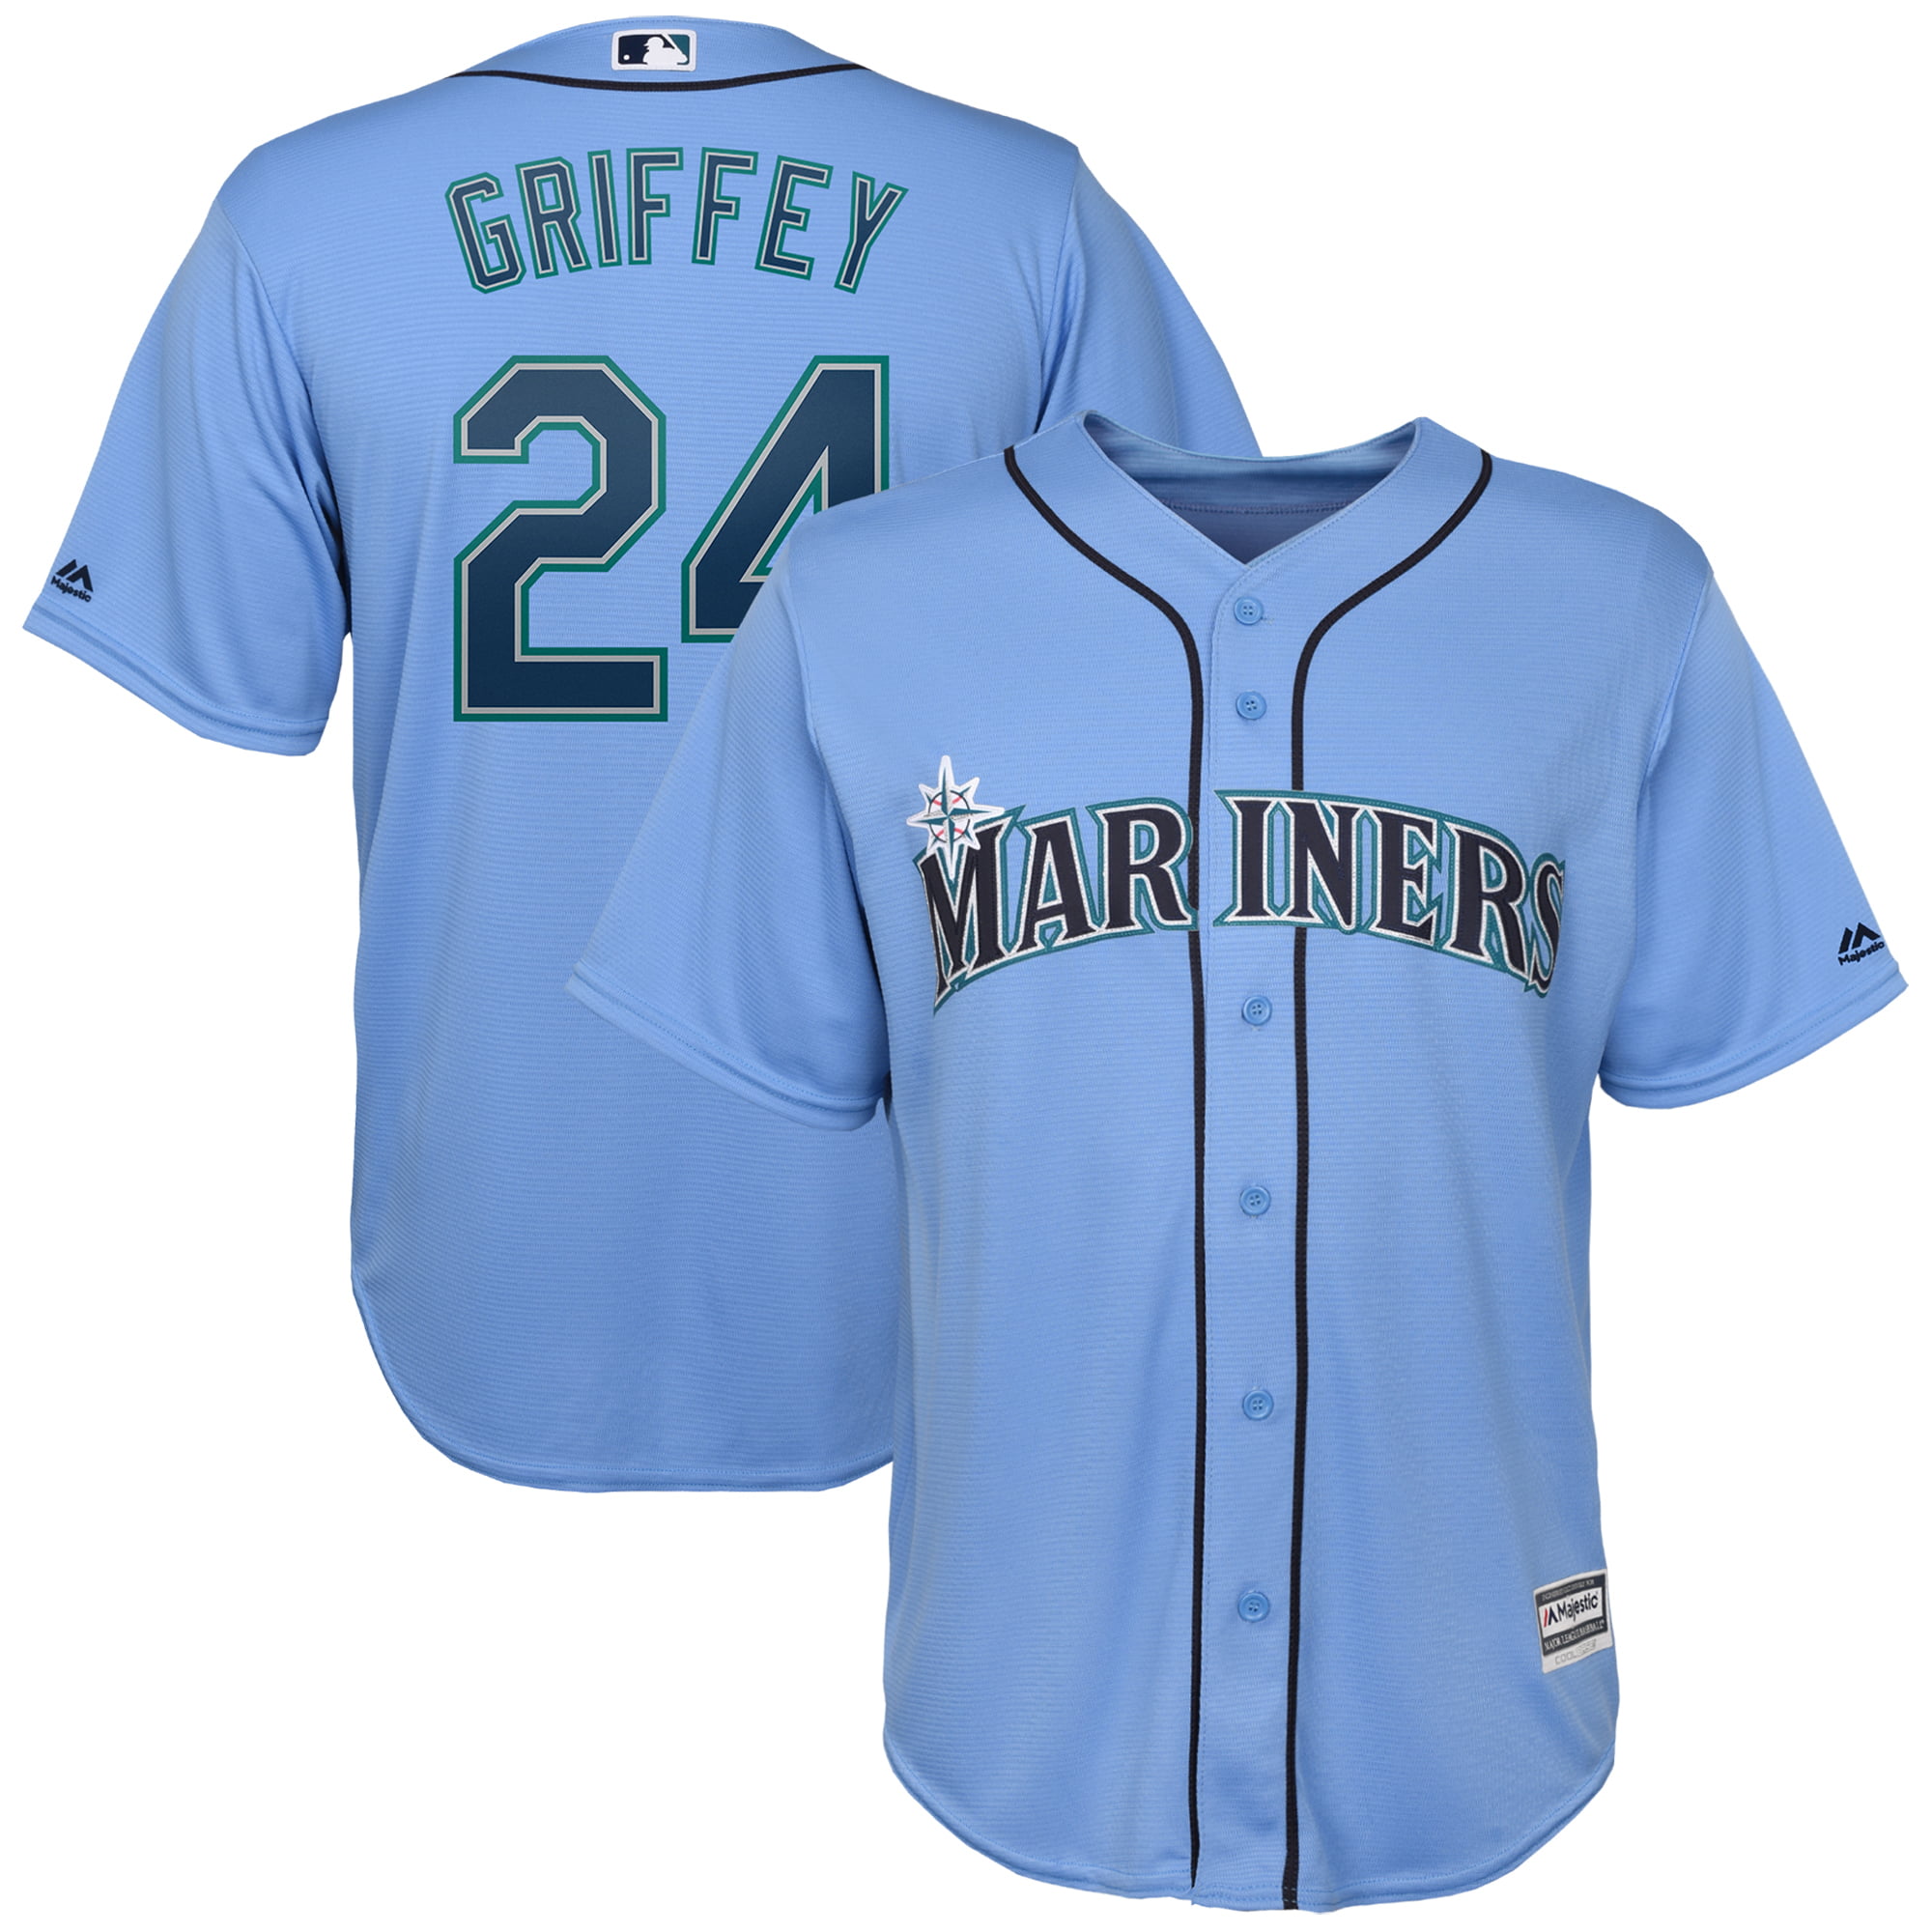 king griffey jersey